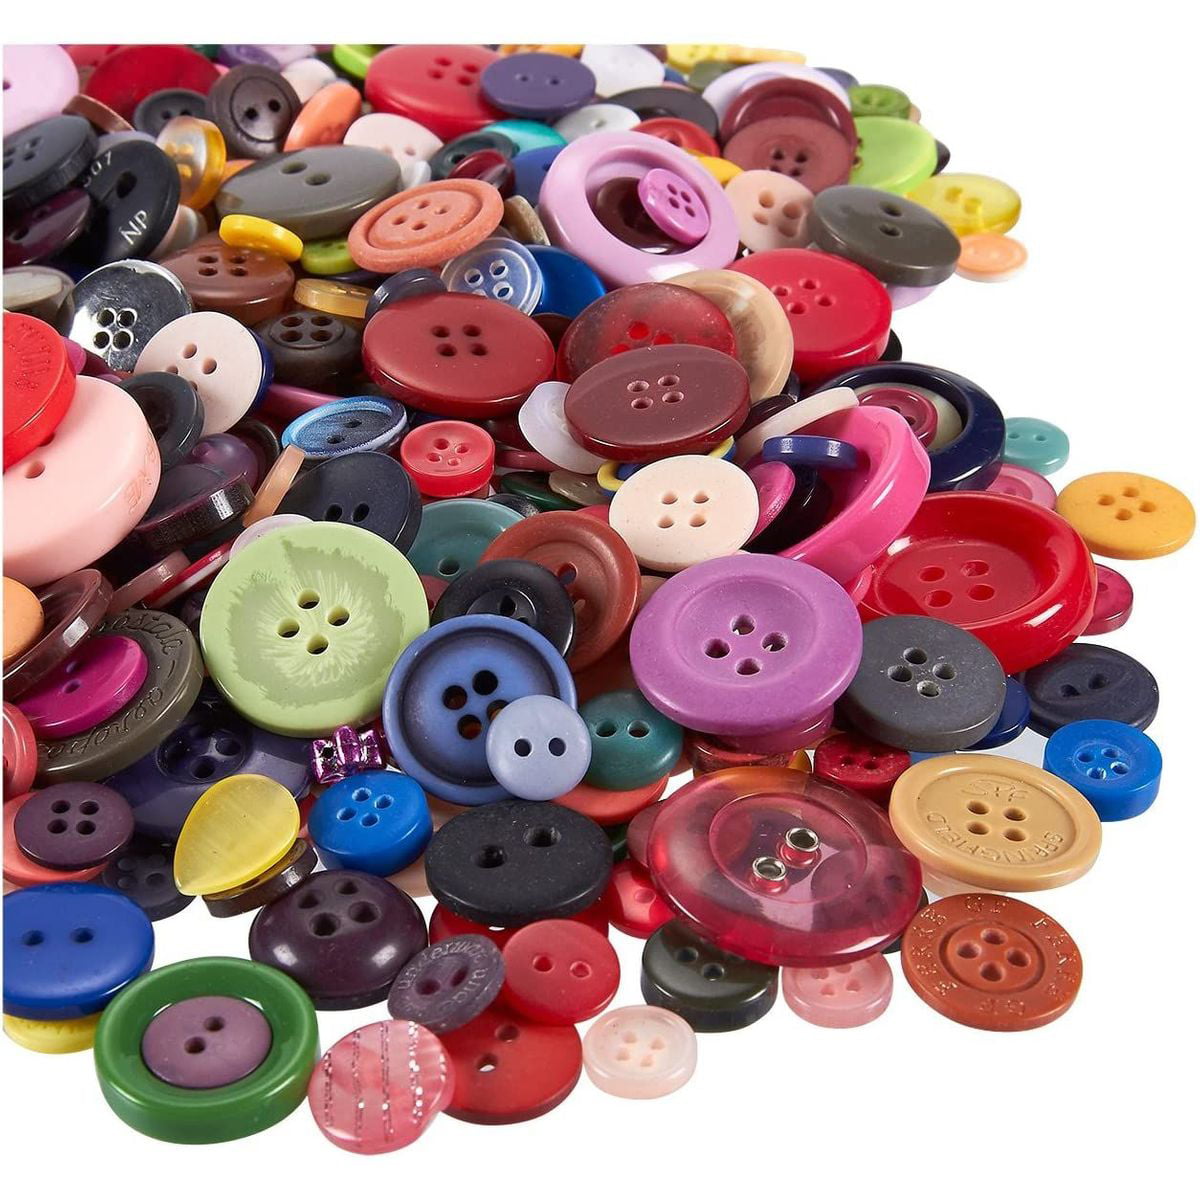 5/8" White buttons Wholesale Bag 